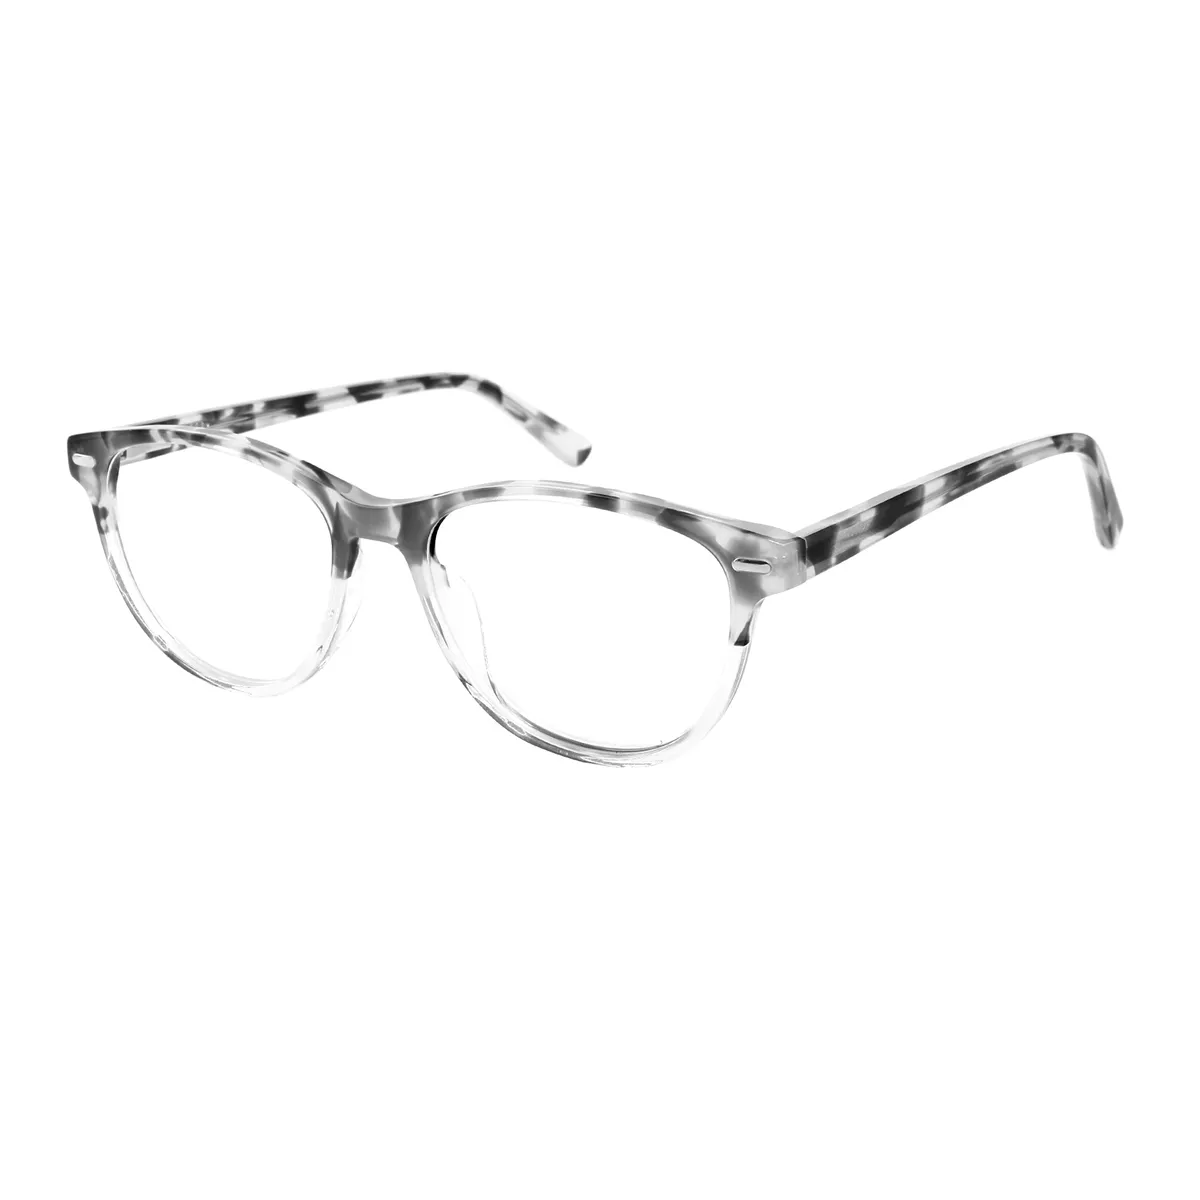 Agricola - Oval  Glasses for Women